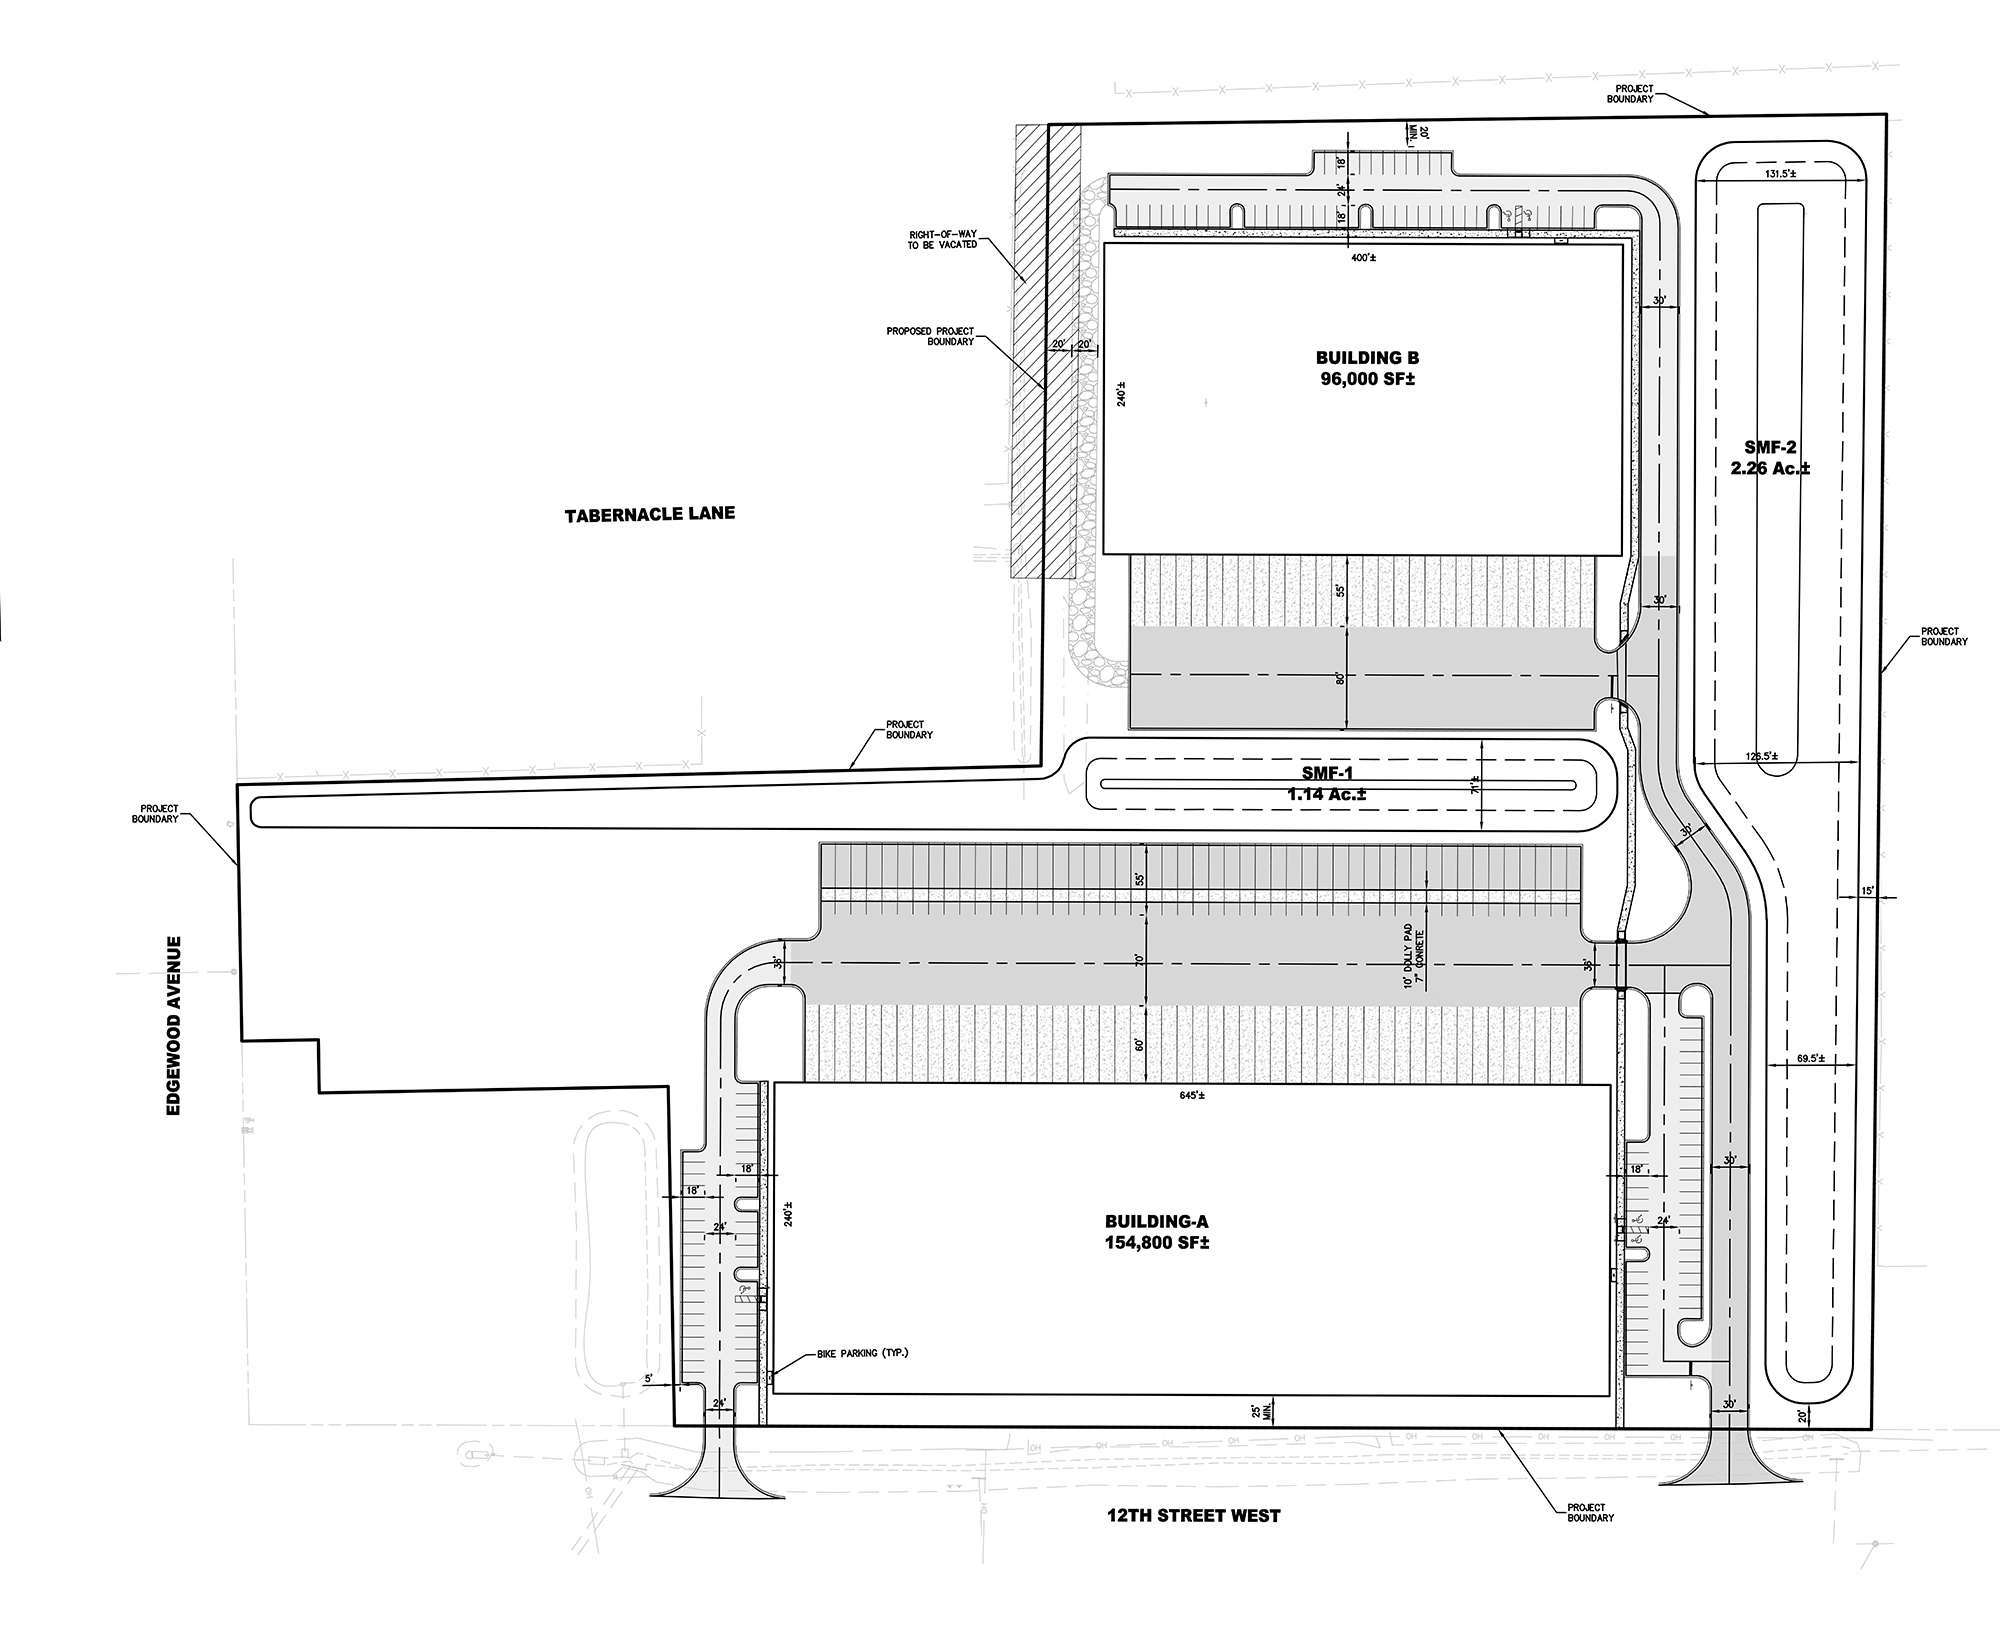 A preliminary site plan for the Edgewood Industrial project.